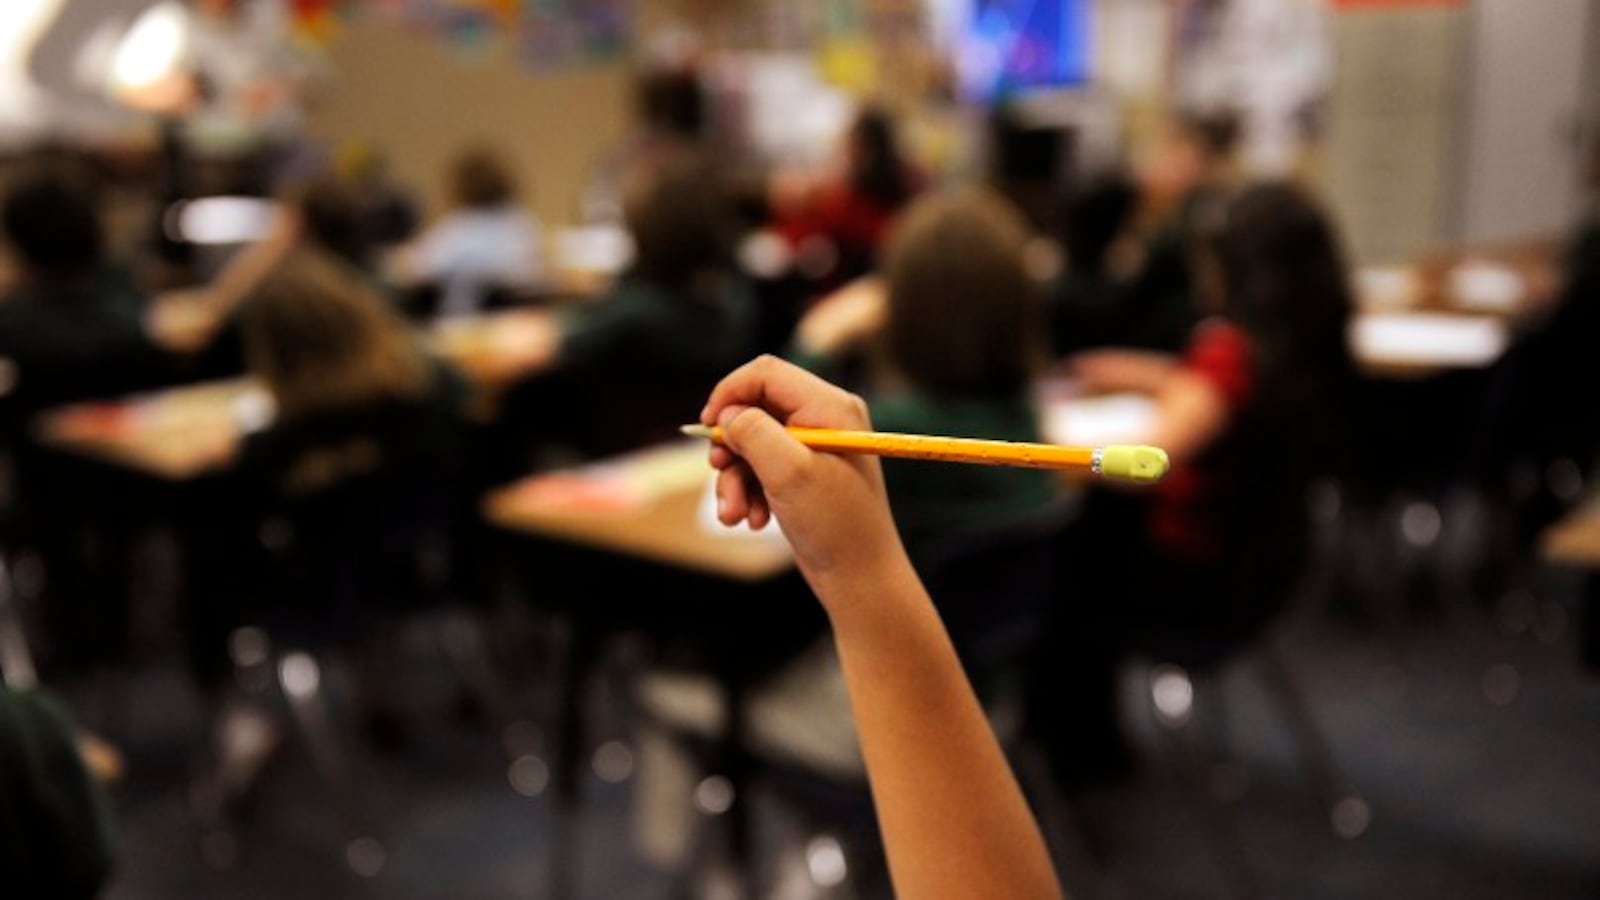 A student holds up a pencil with a yellow eraser.